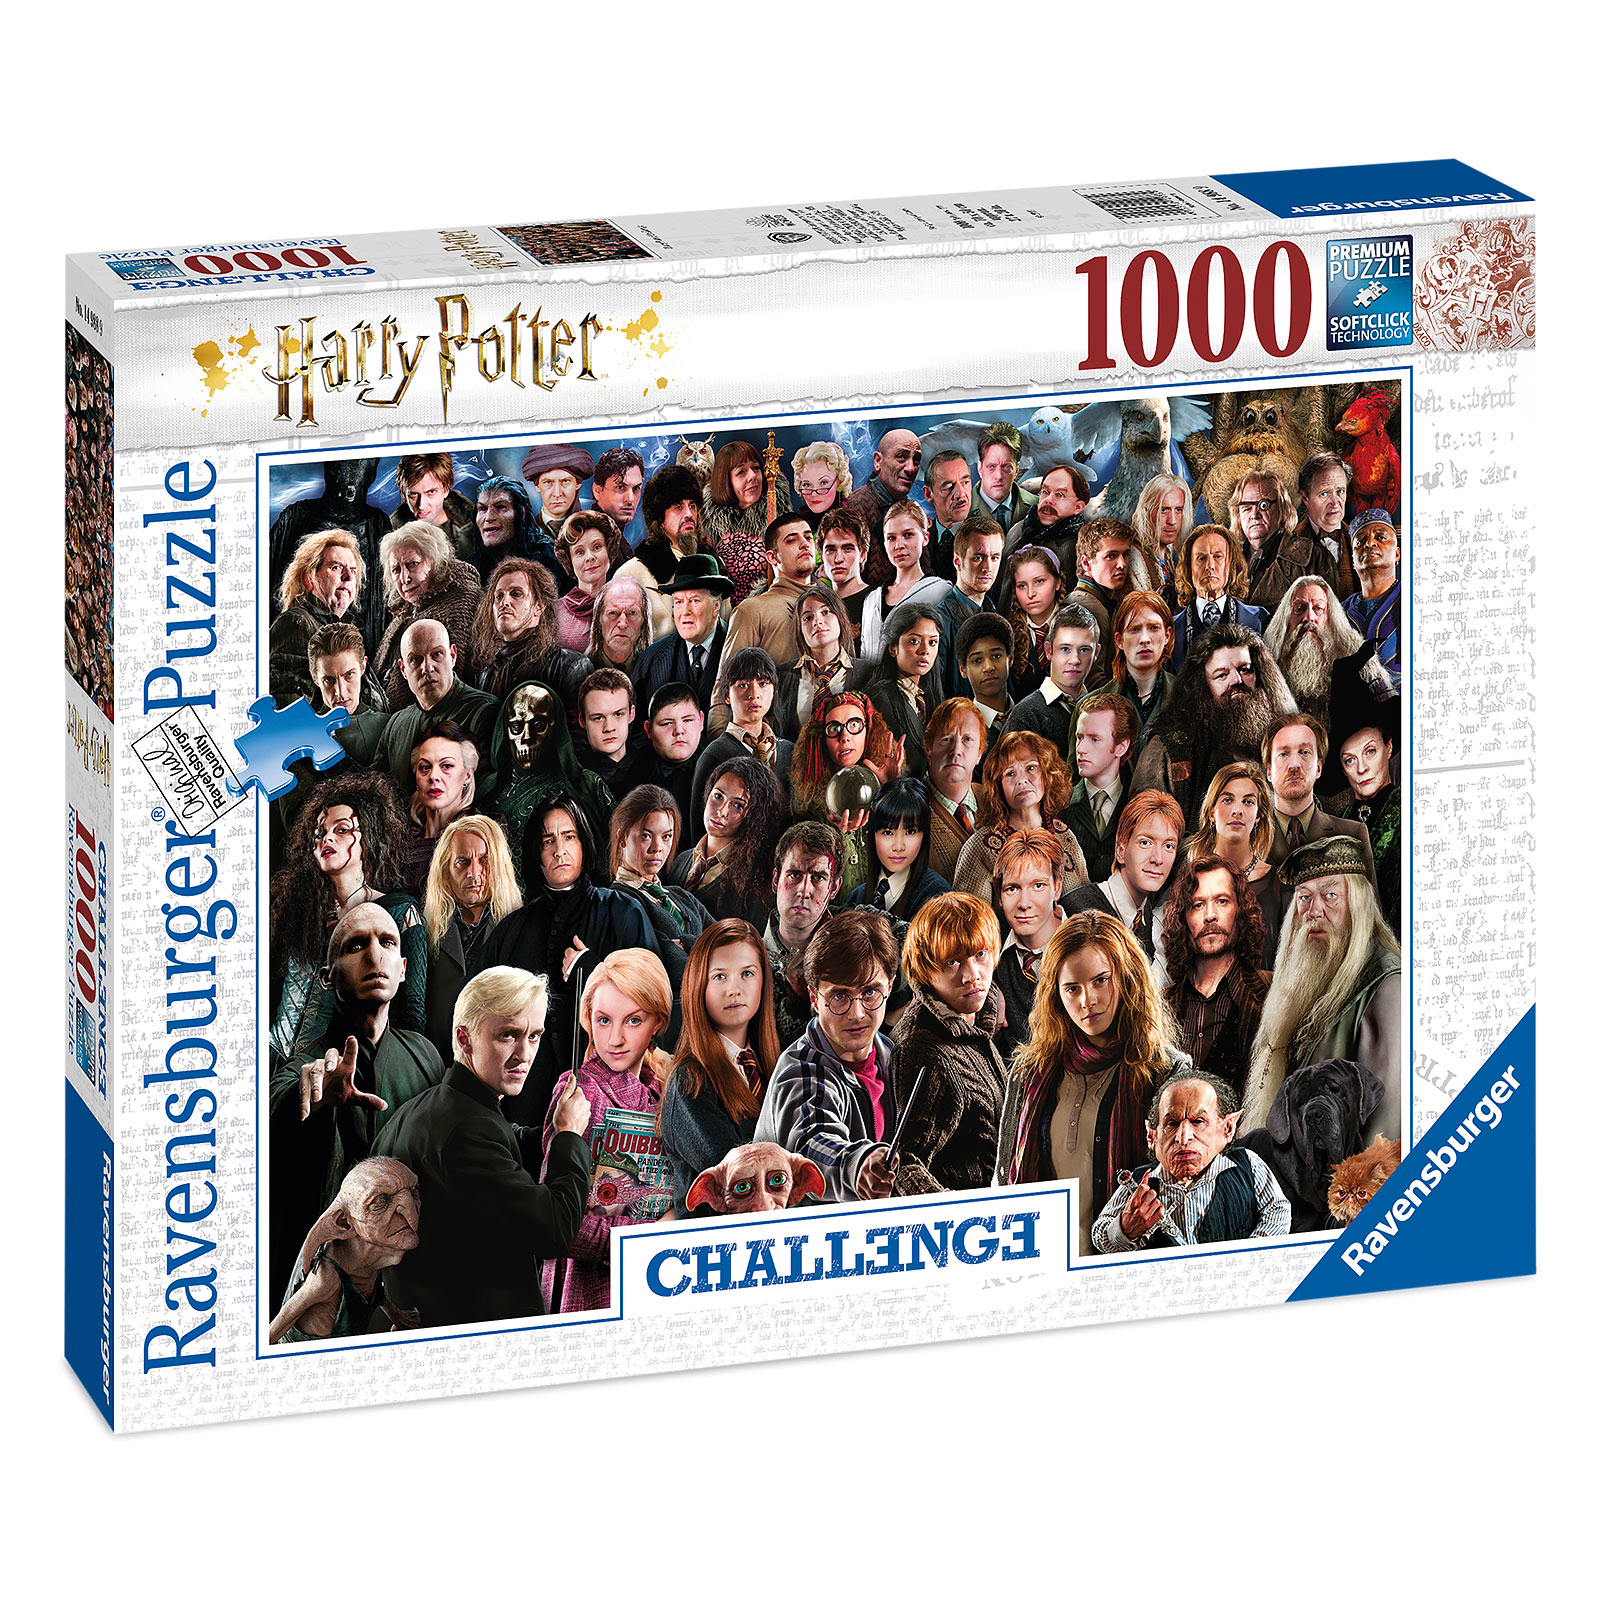 Harry Potter - Characters Challenge Puzzle